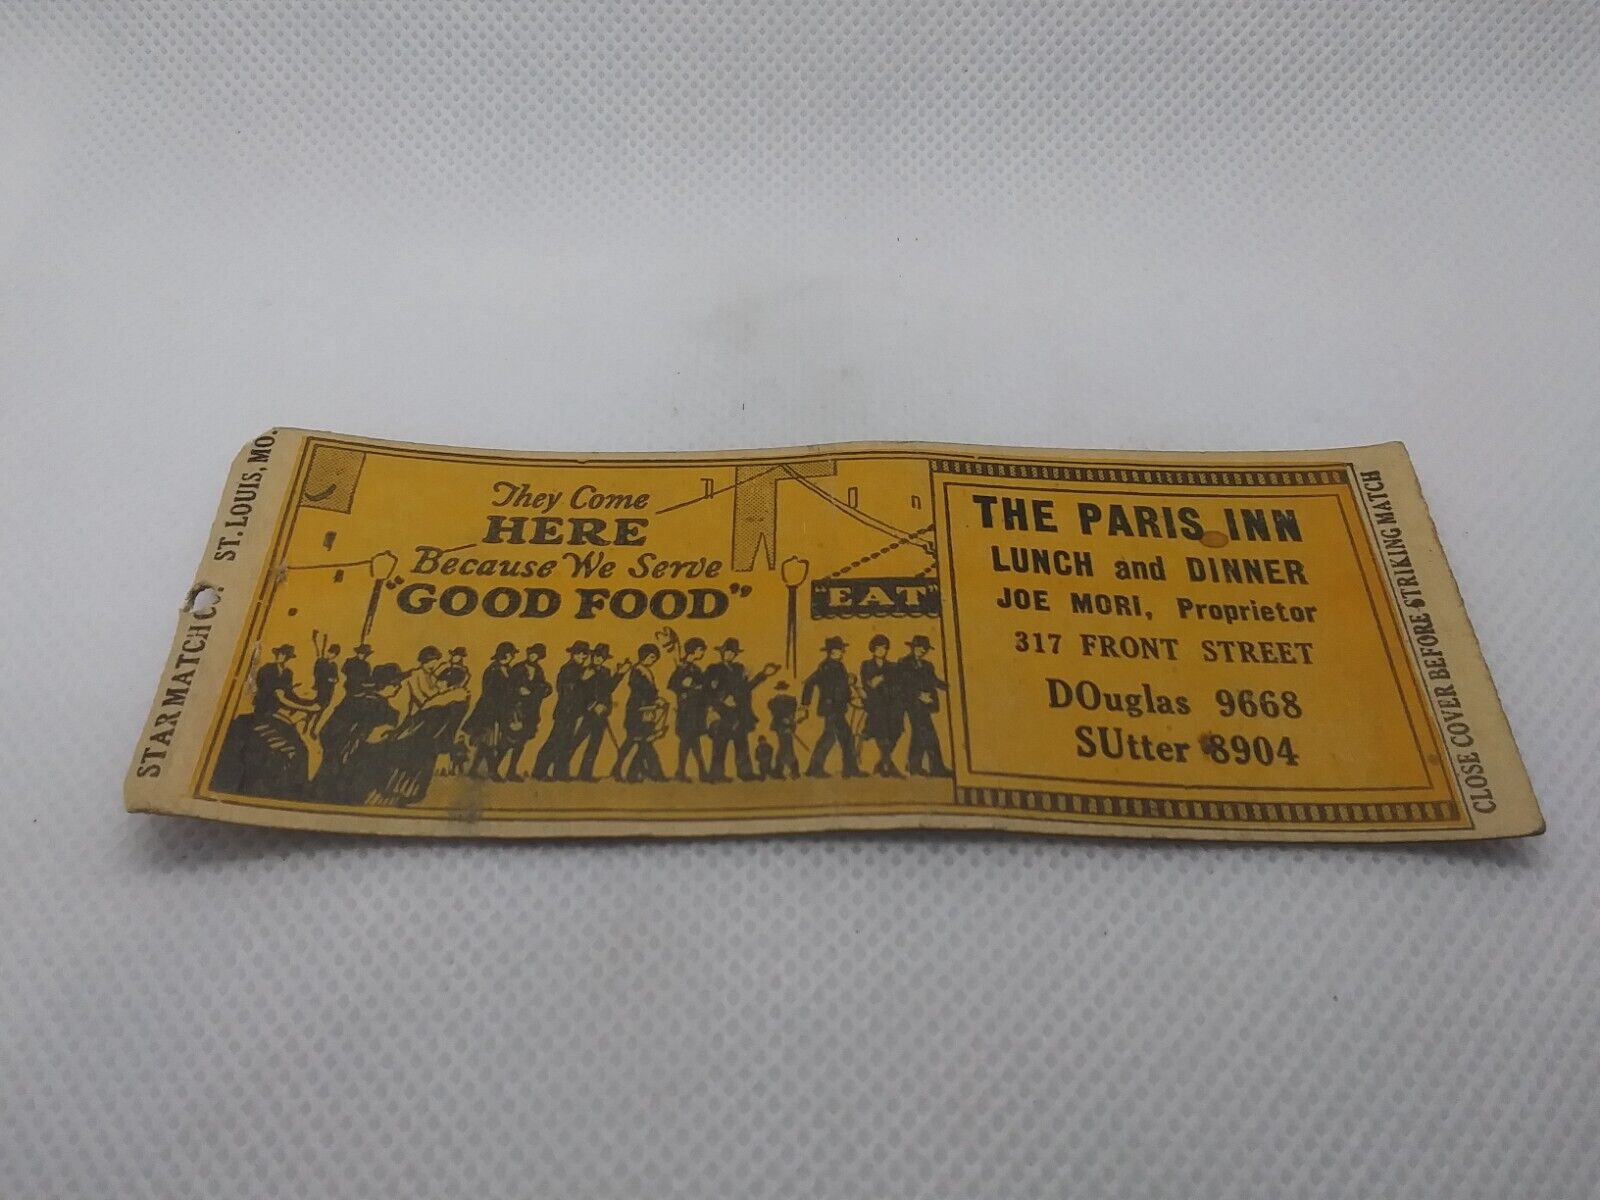 Vintage The Paris Inn They Come Here Because We Serve Good Food Matchbook